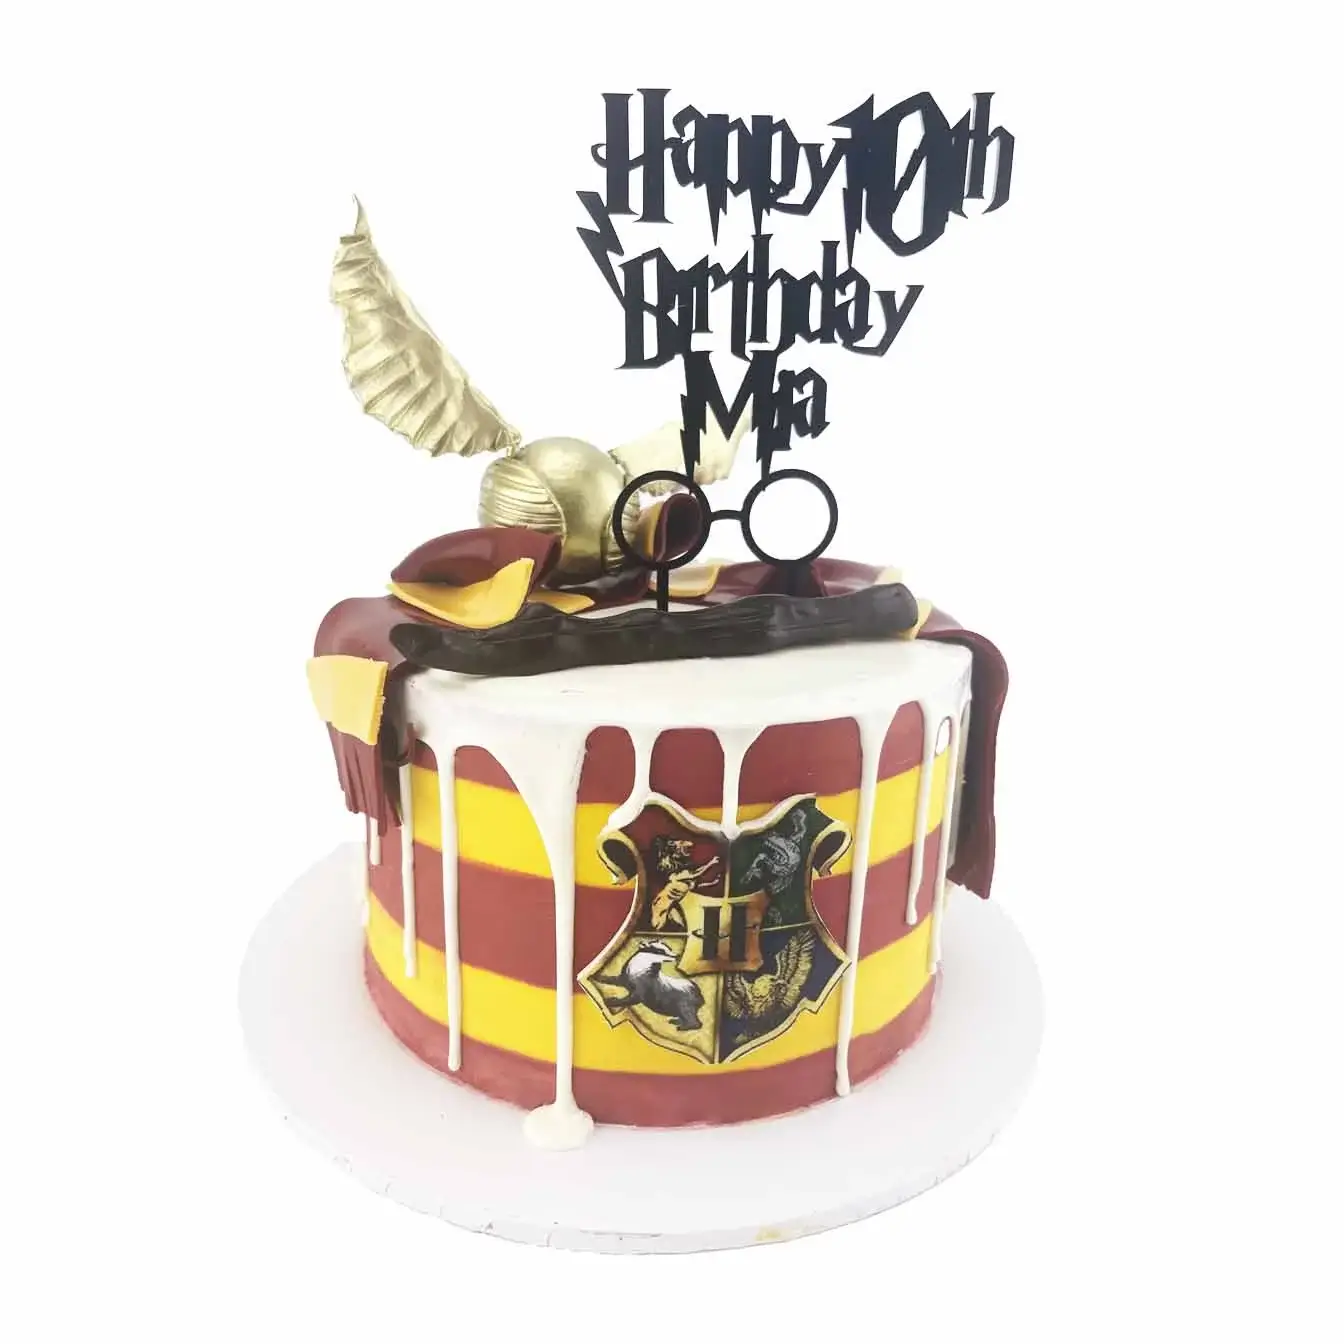 A Harry Potter-themed cake with a fondant magic wand, personalized cake topper, golden snitch, and Hogwarts house scarf. Perfect for any celebration!